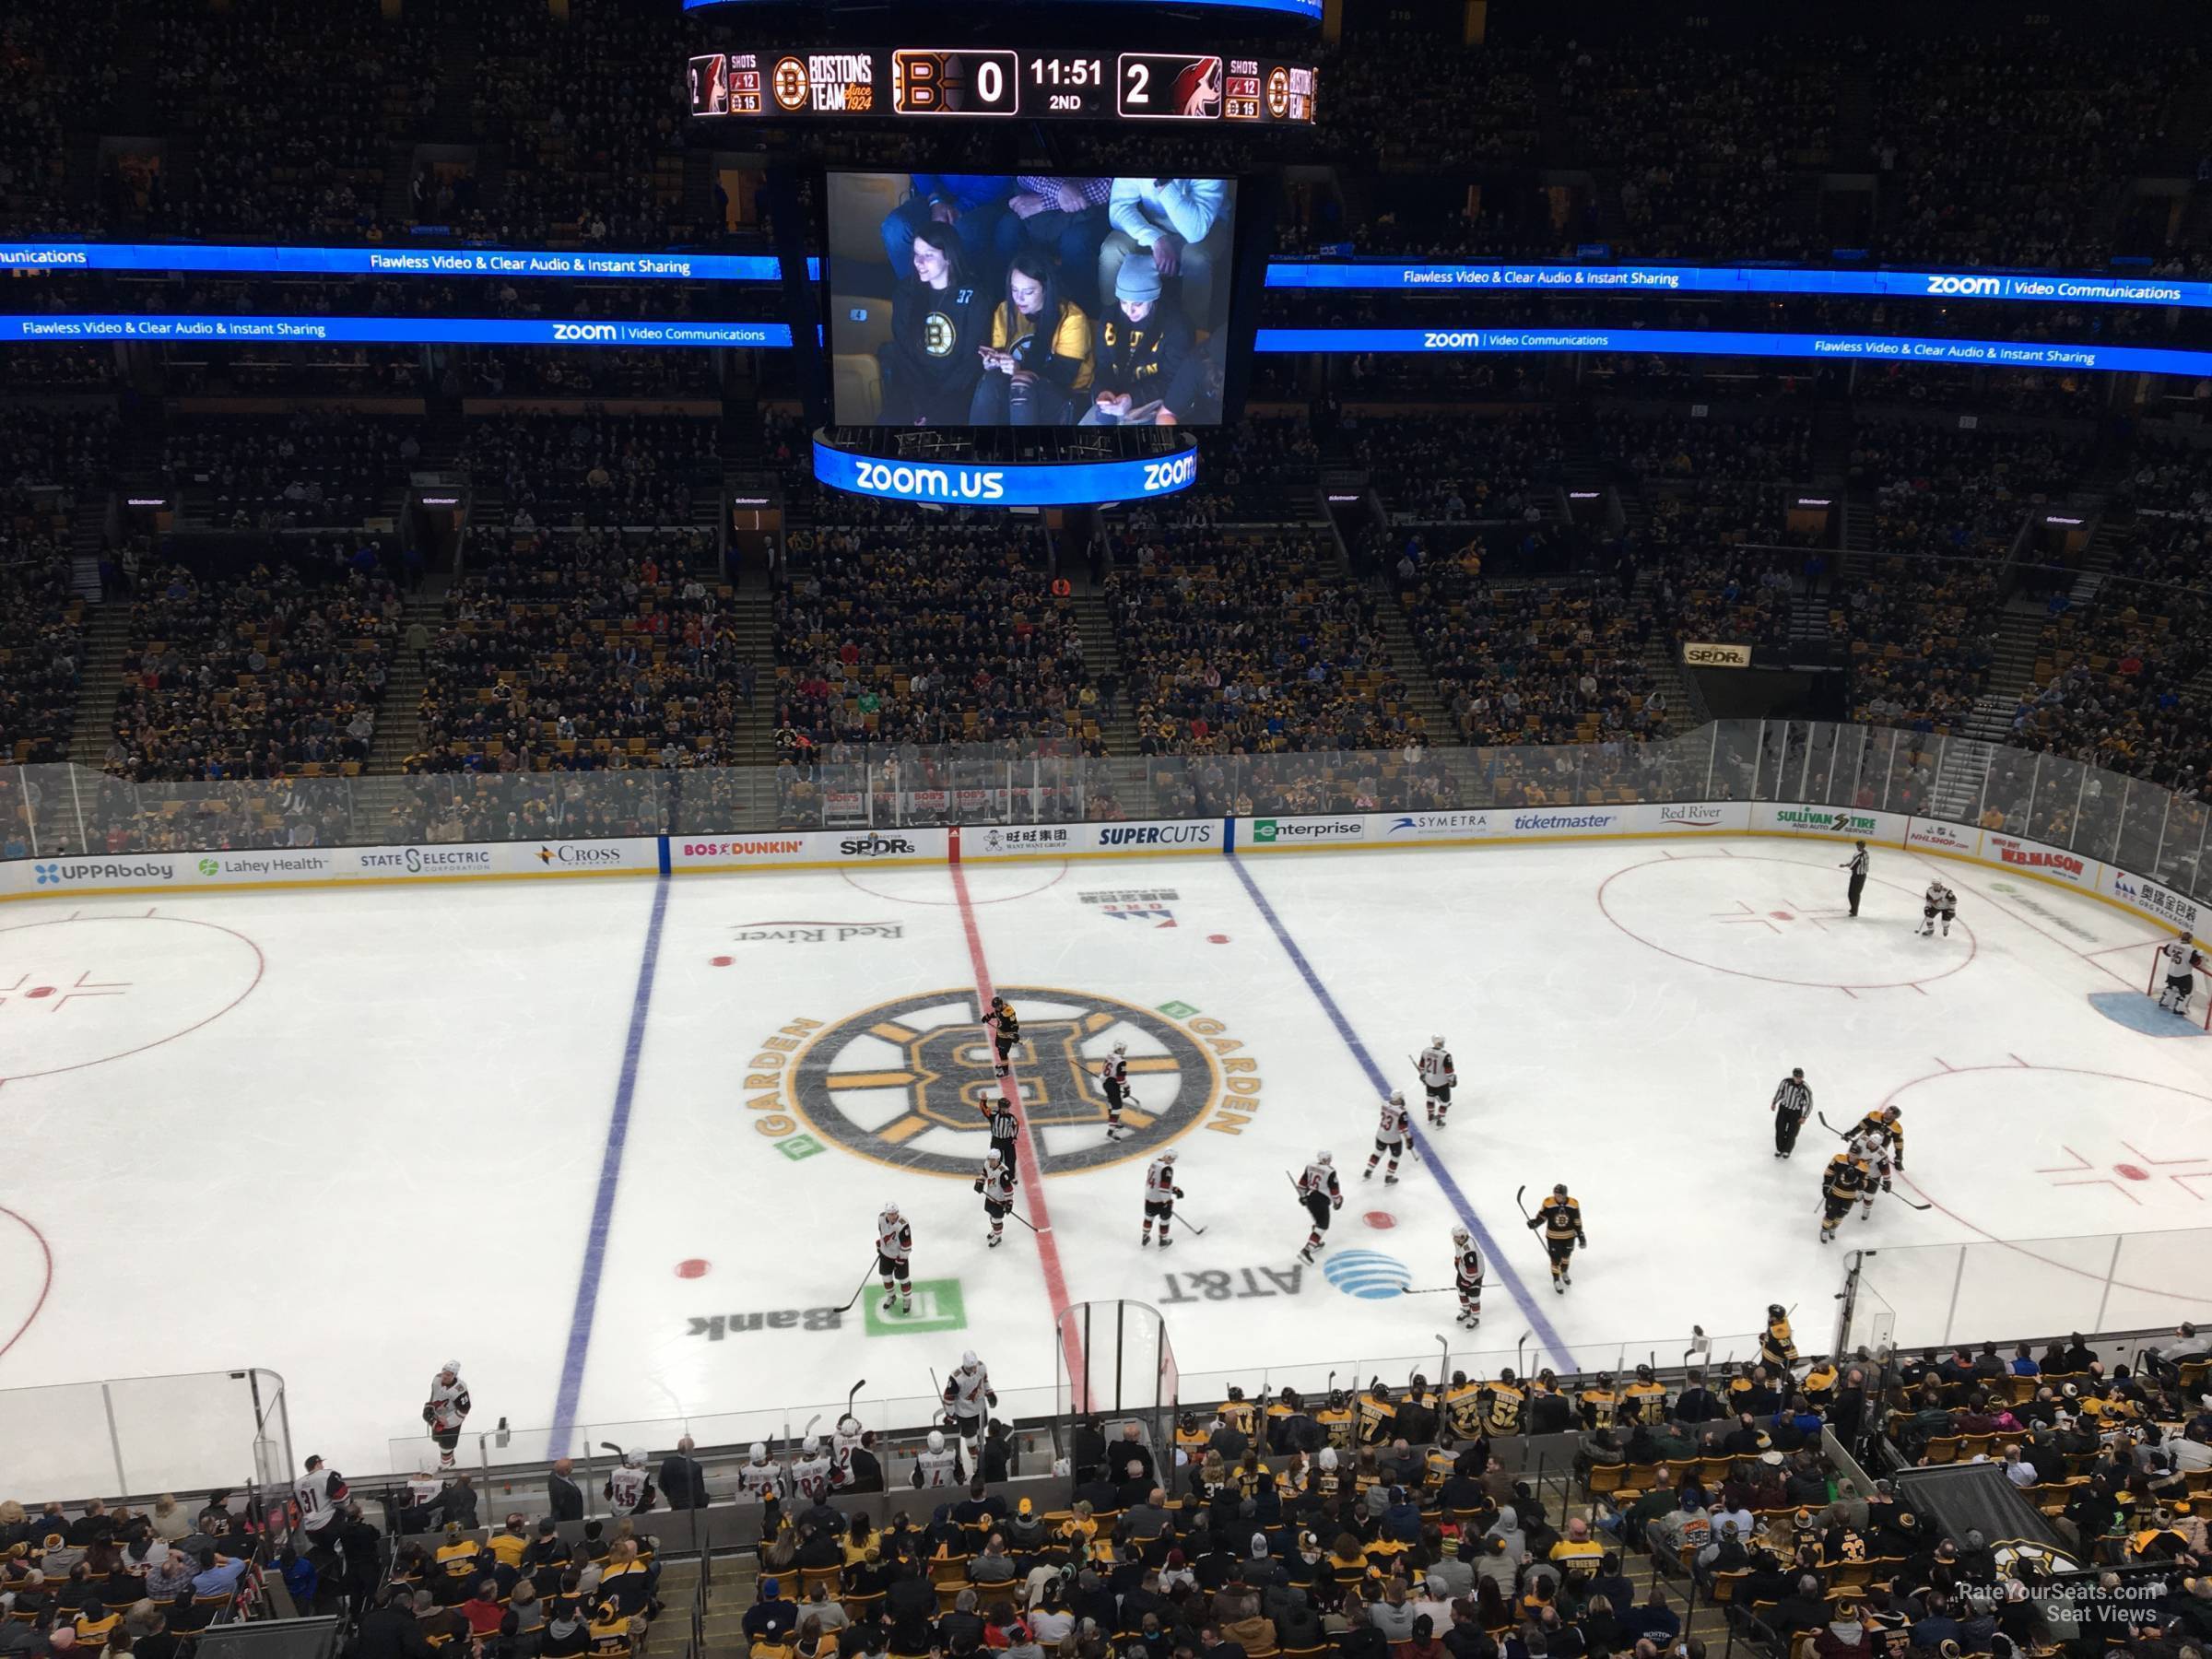 section 301, row 3 seat view  for hockey - td garden